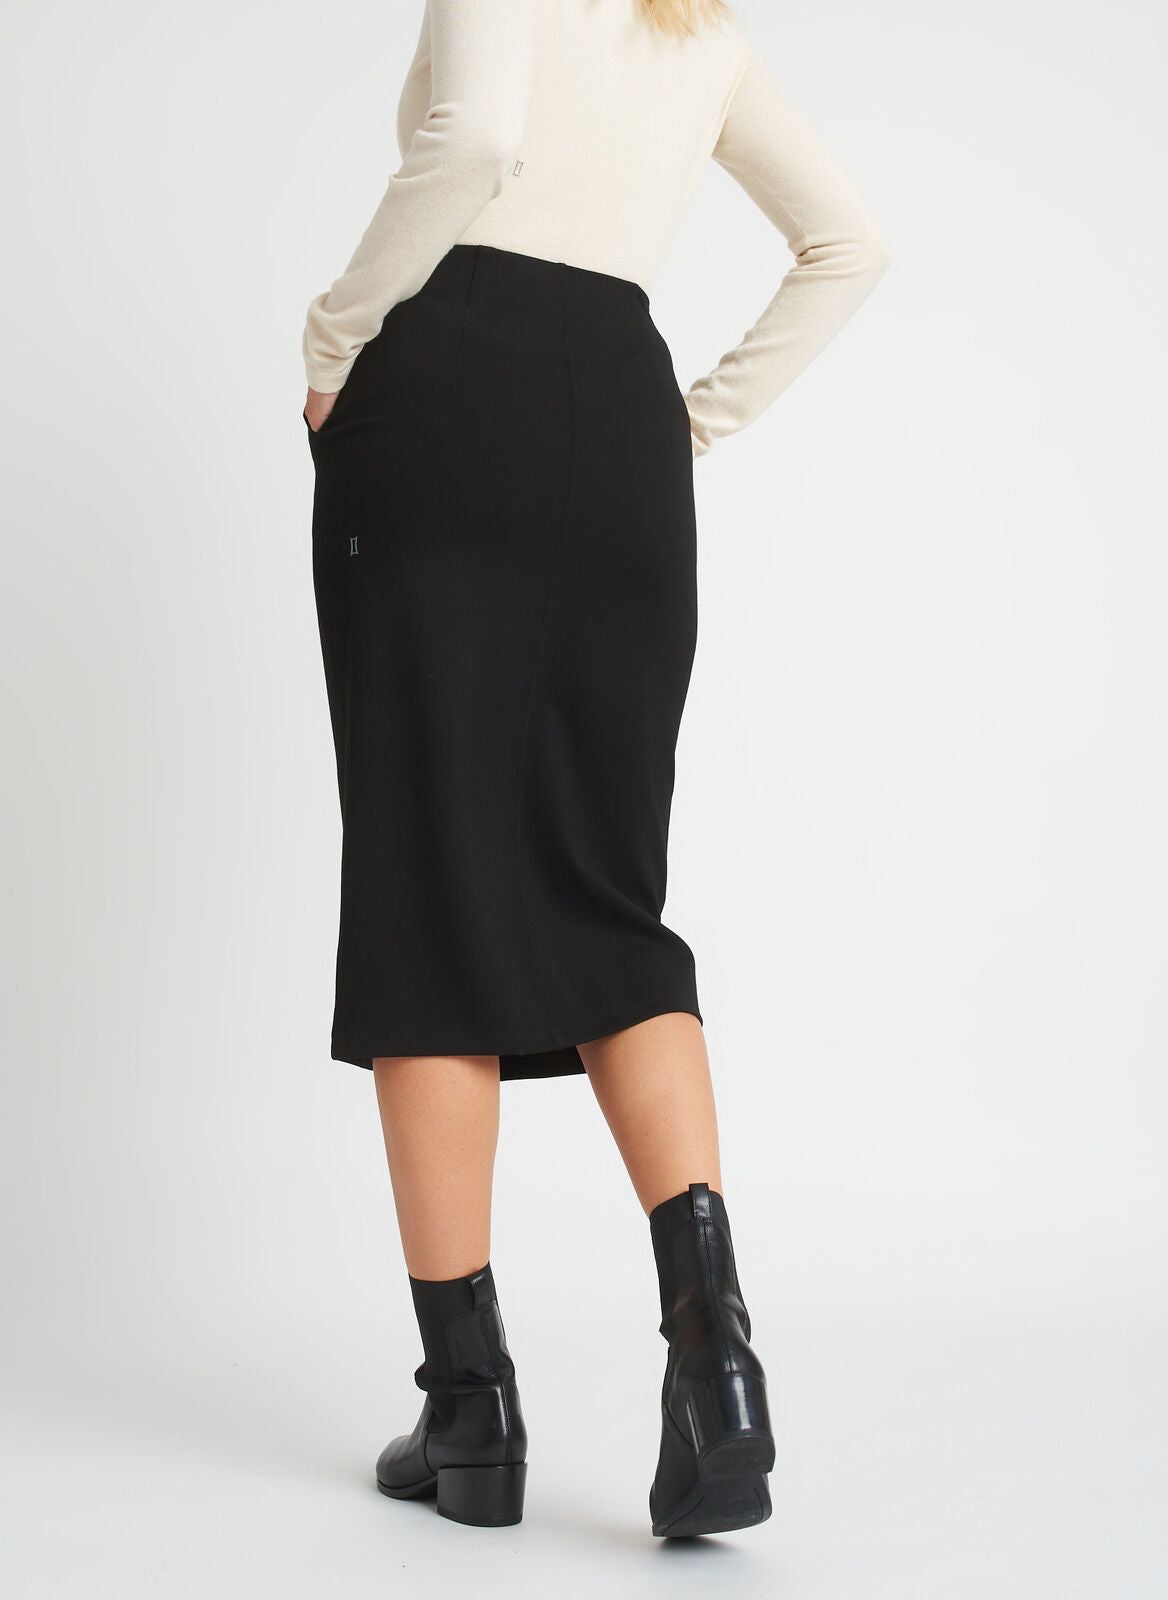 Kit and Ace — Serenity Double Knit Pencil Skirt